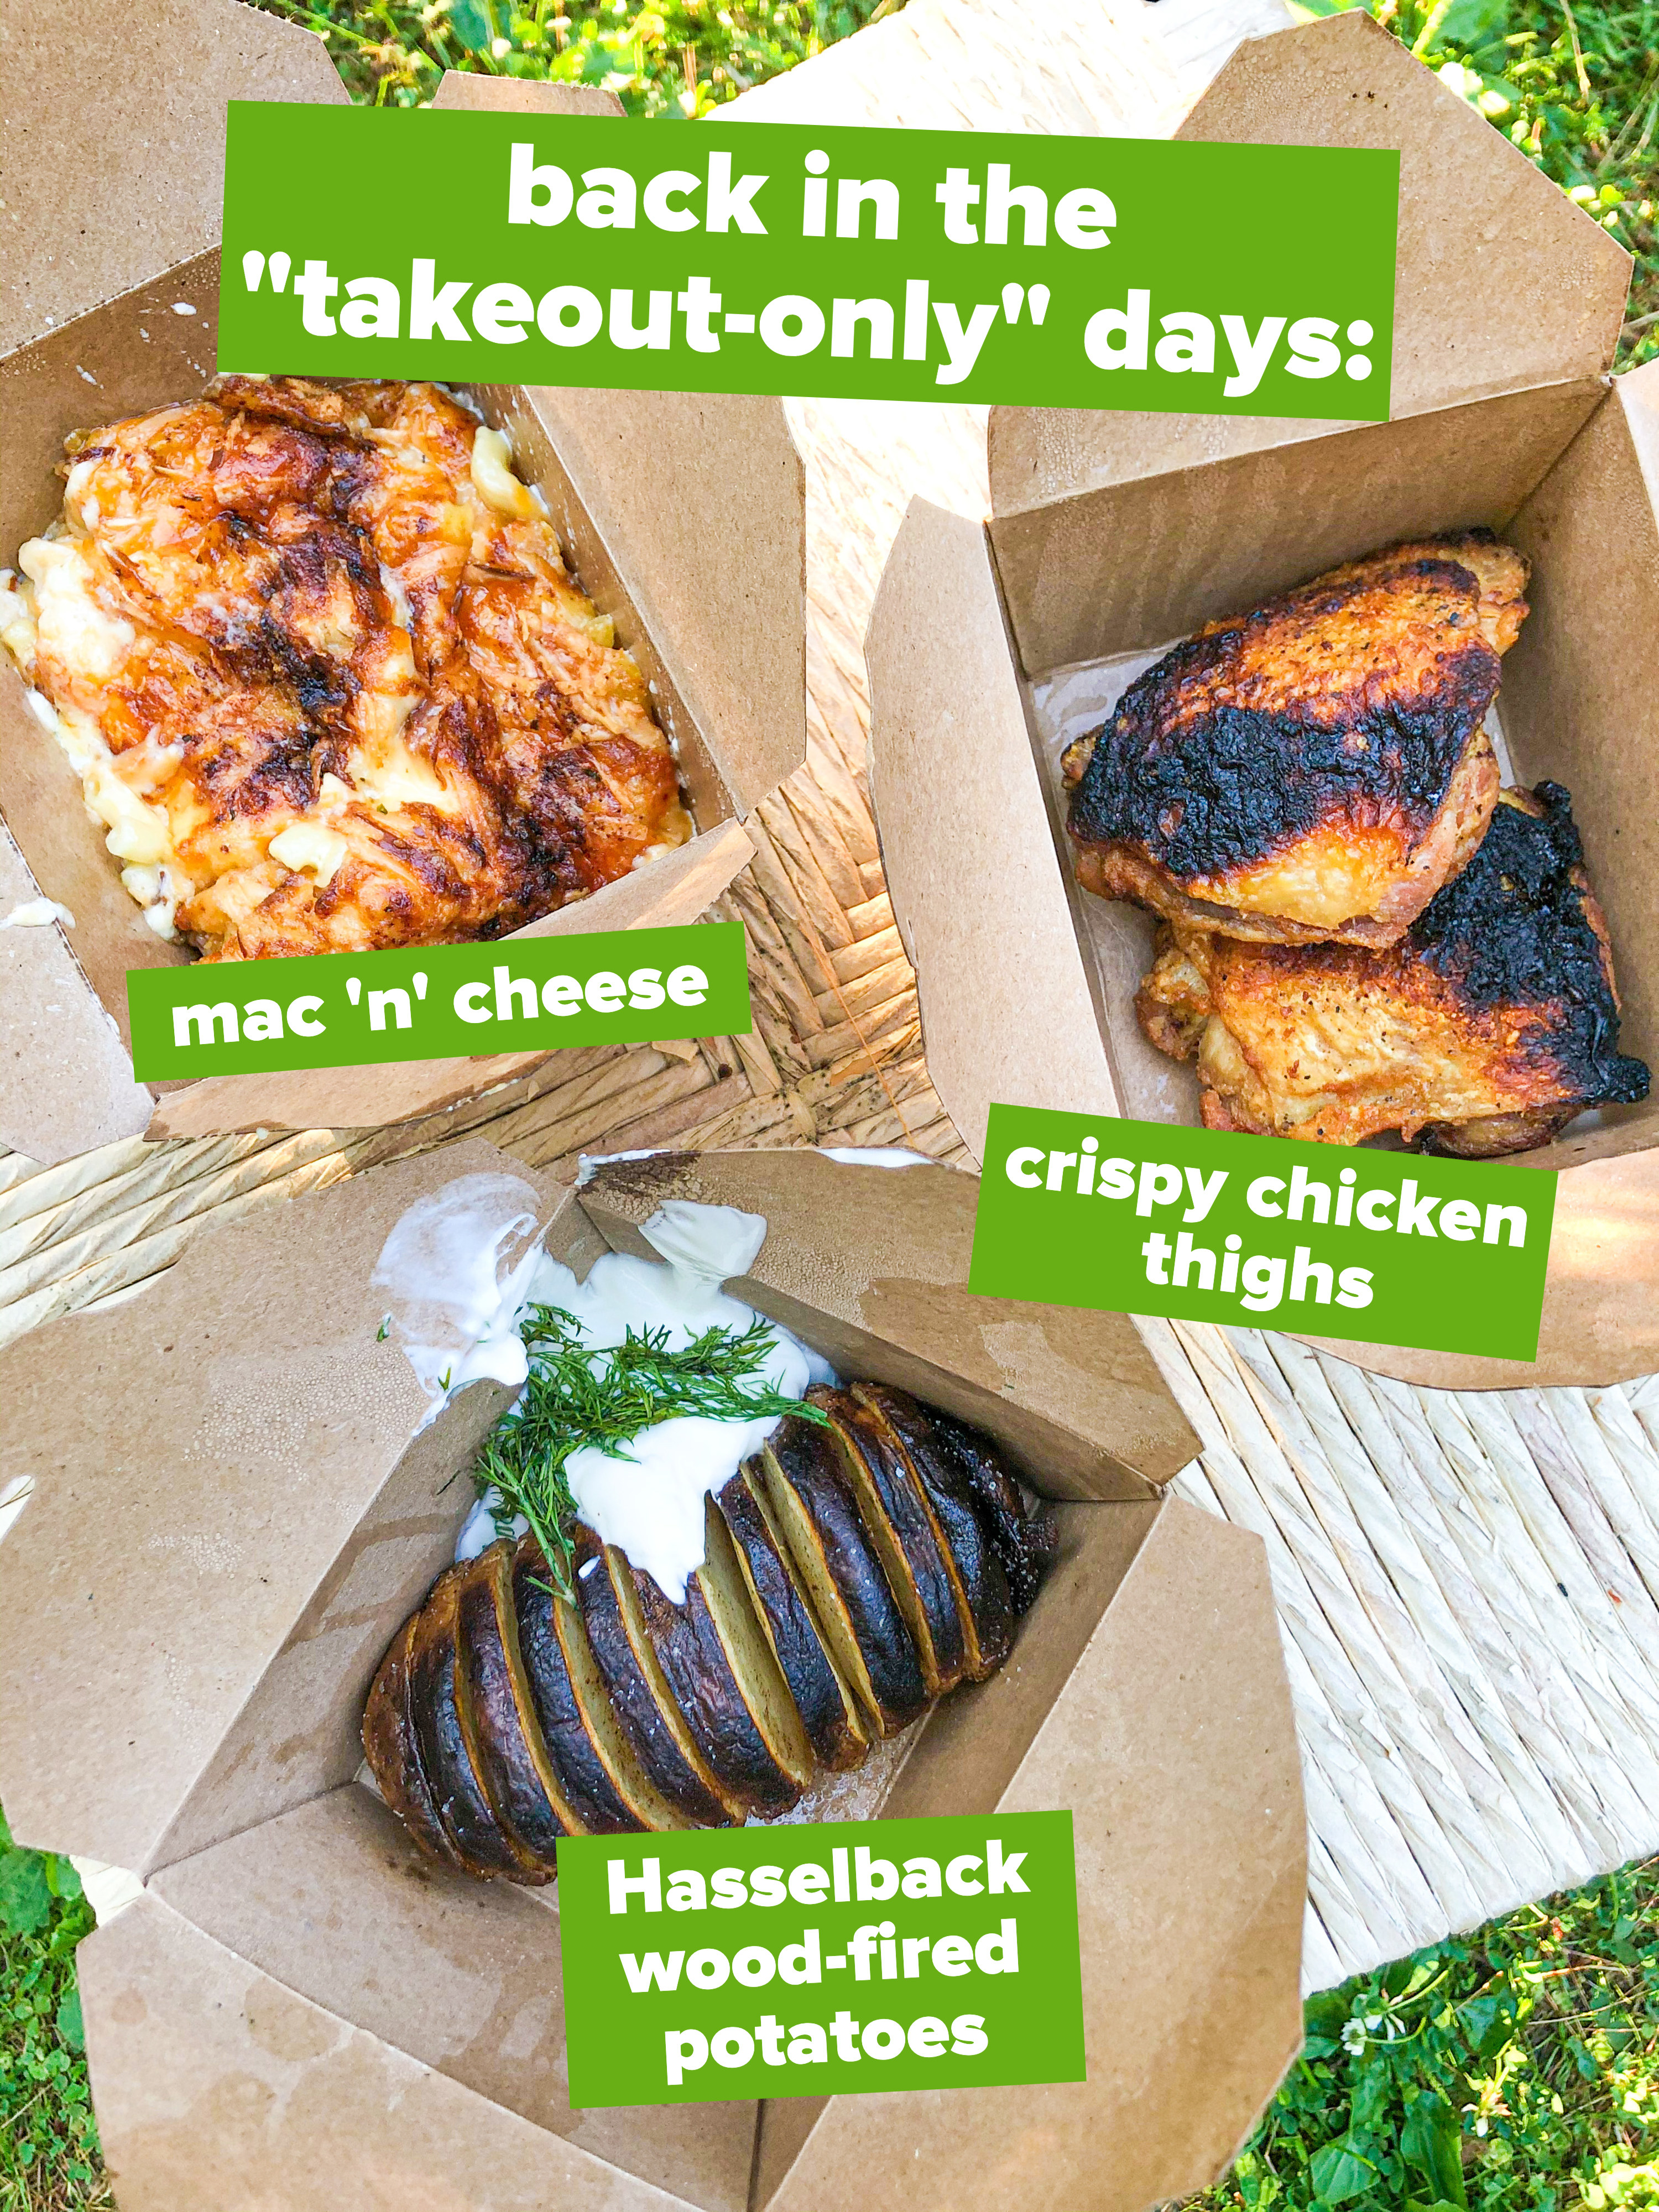 &quot;Back in the takeout-only days text&quot; with several items ID&#x27;ed: Hasselback wood-fired potatoes, mac &#x27;n&#x27; cheese, and crispy chicken thighs